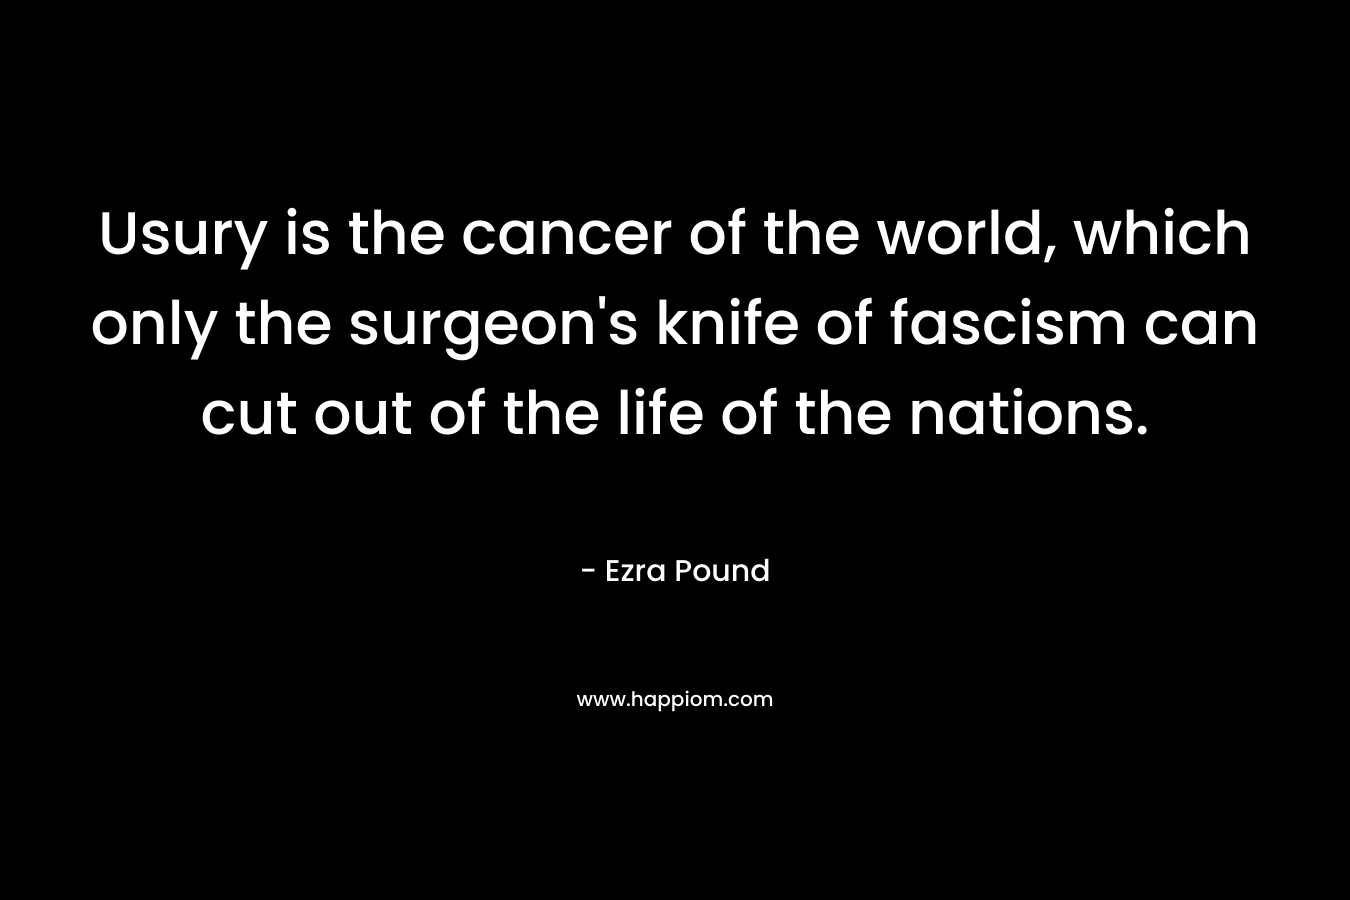 Usury is the cancer of the world, which only the surgeon’s knife of fascism can cut out of the life of the nations. – Ezra Pound